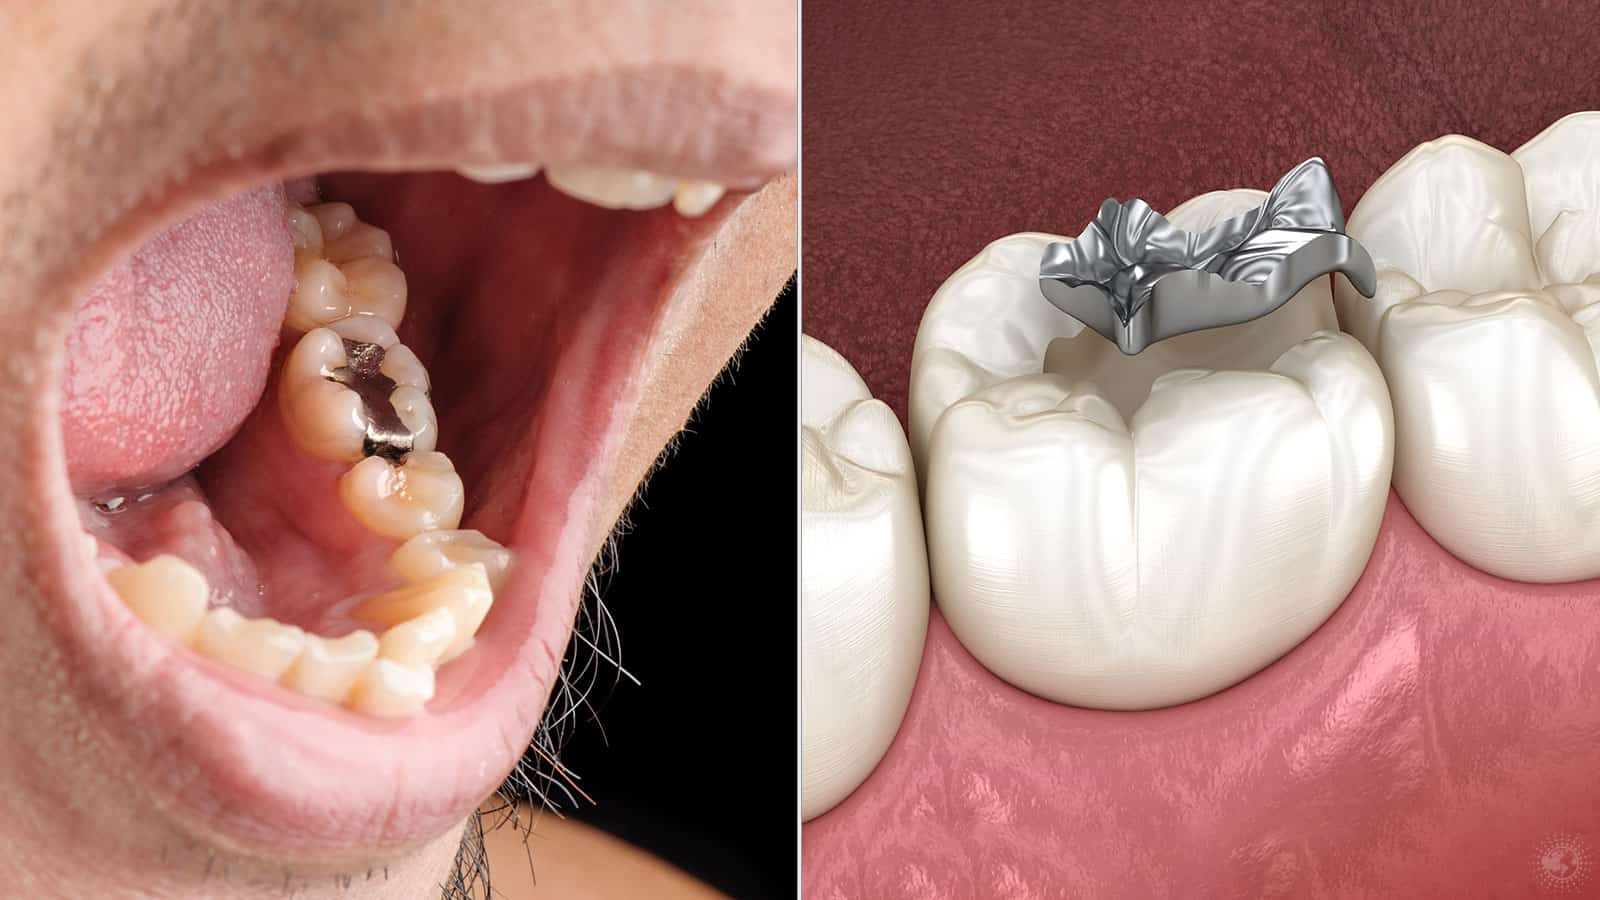 Researchers Explain Why You Should Never Get Silver Fillings